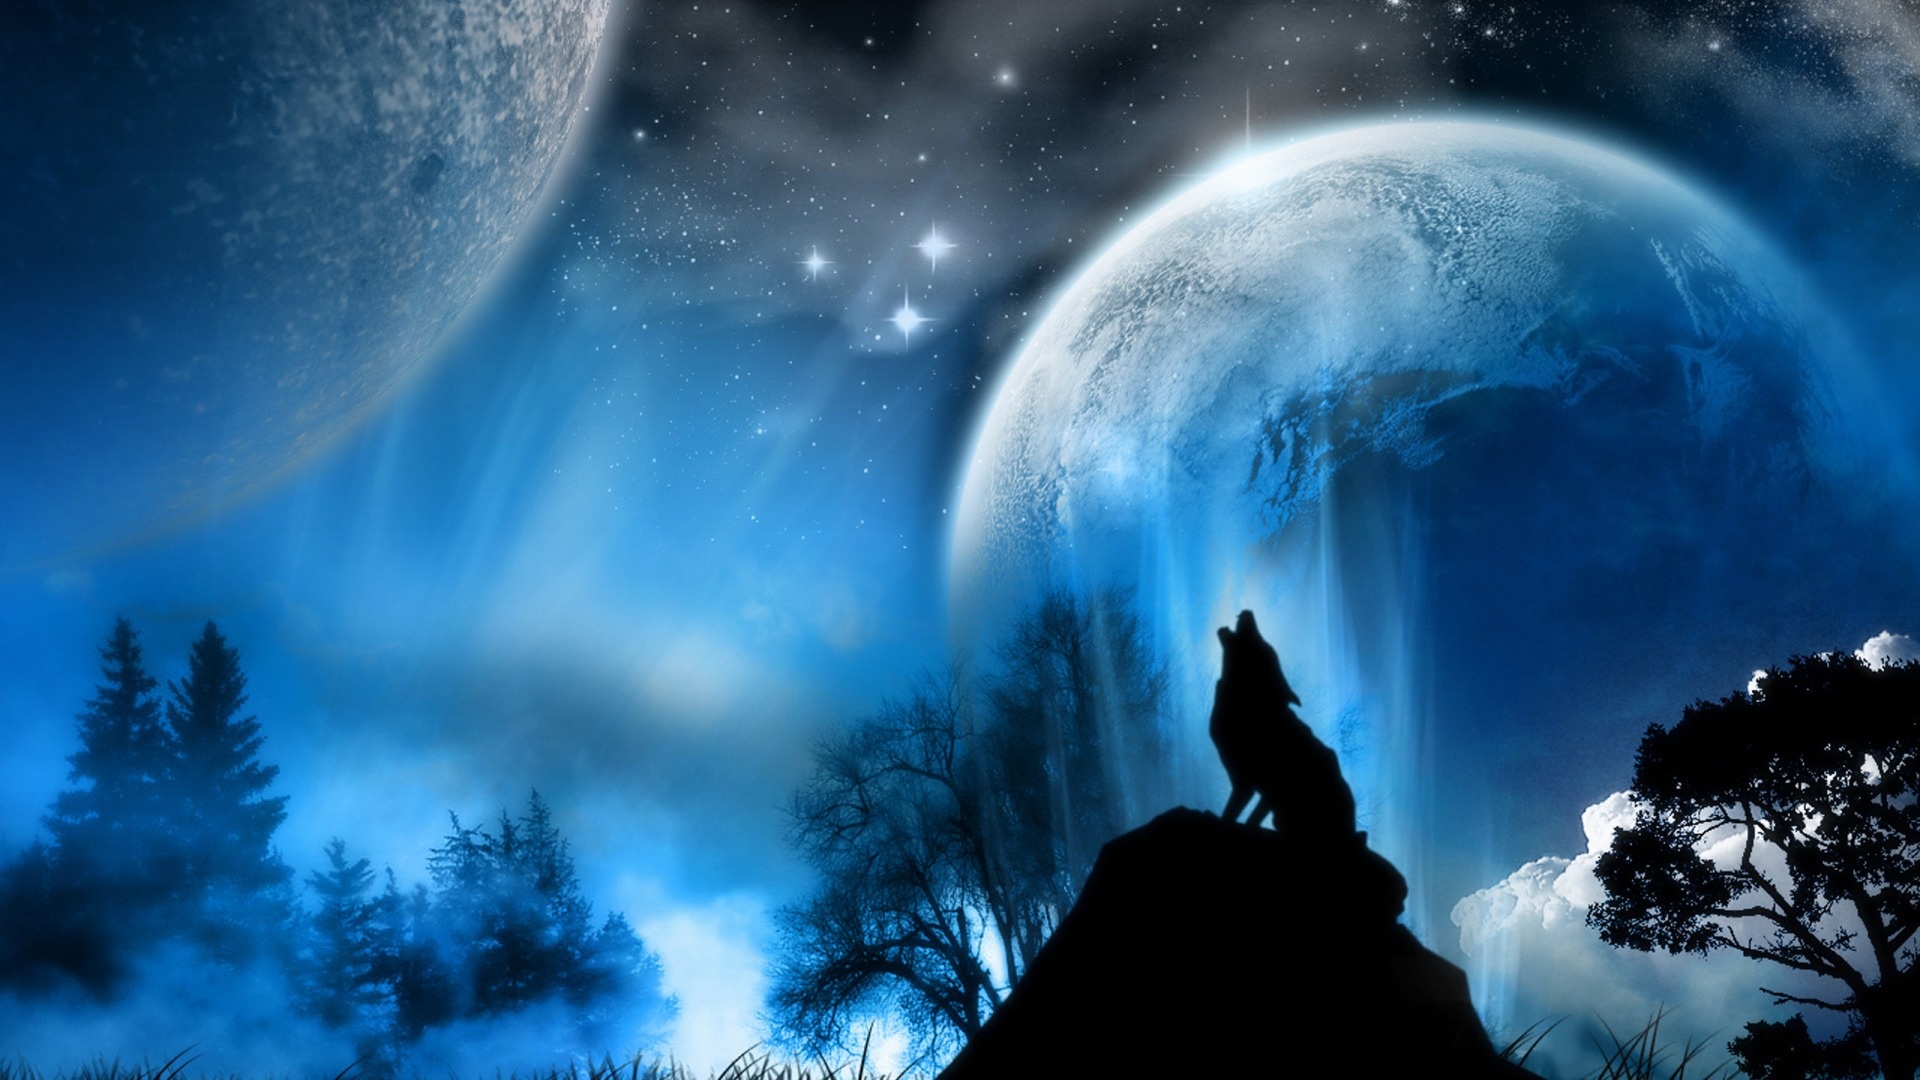 wallpapers winter wallpaper background wolf ps3 crying favorite